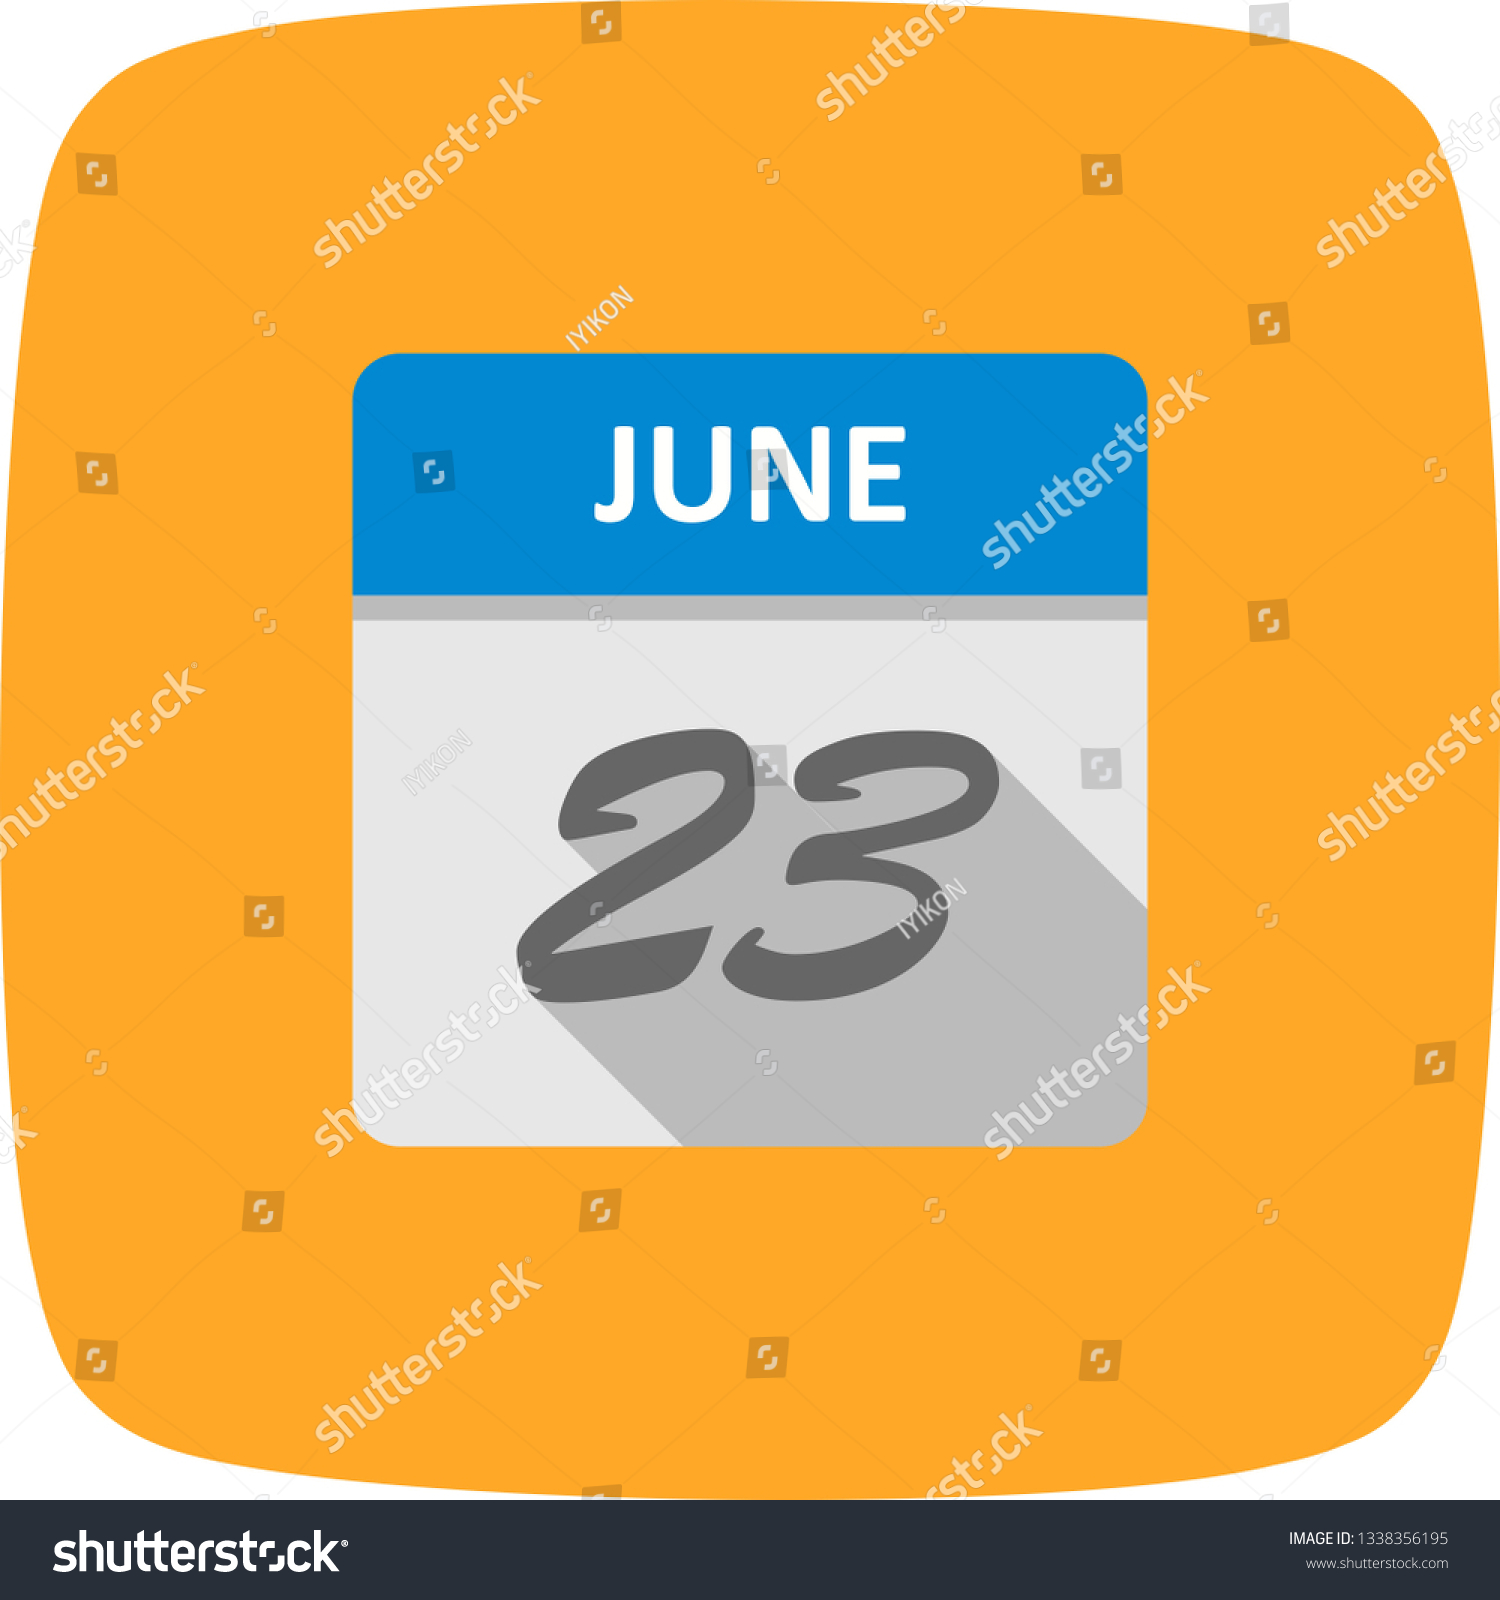 June 23rd Date on a Single Day Calendar Royalty Free Stock Vector